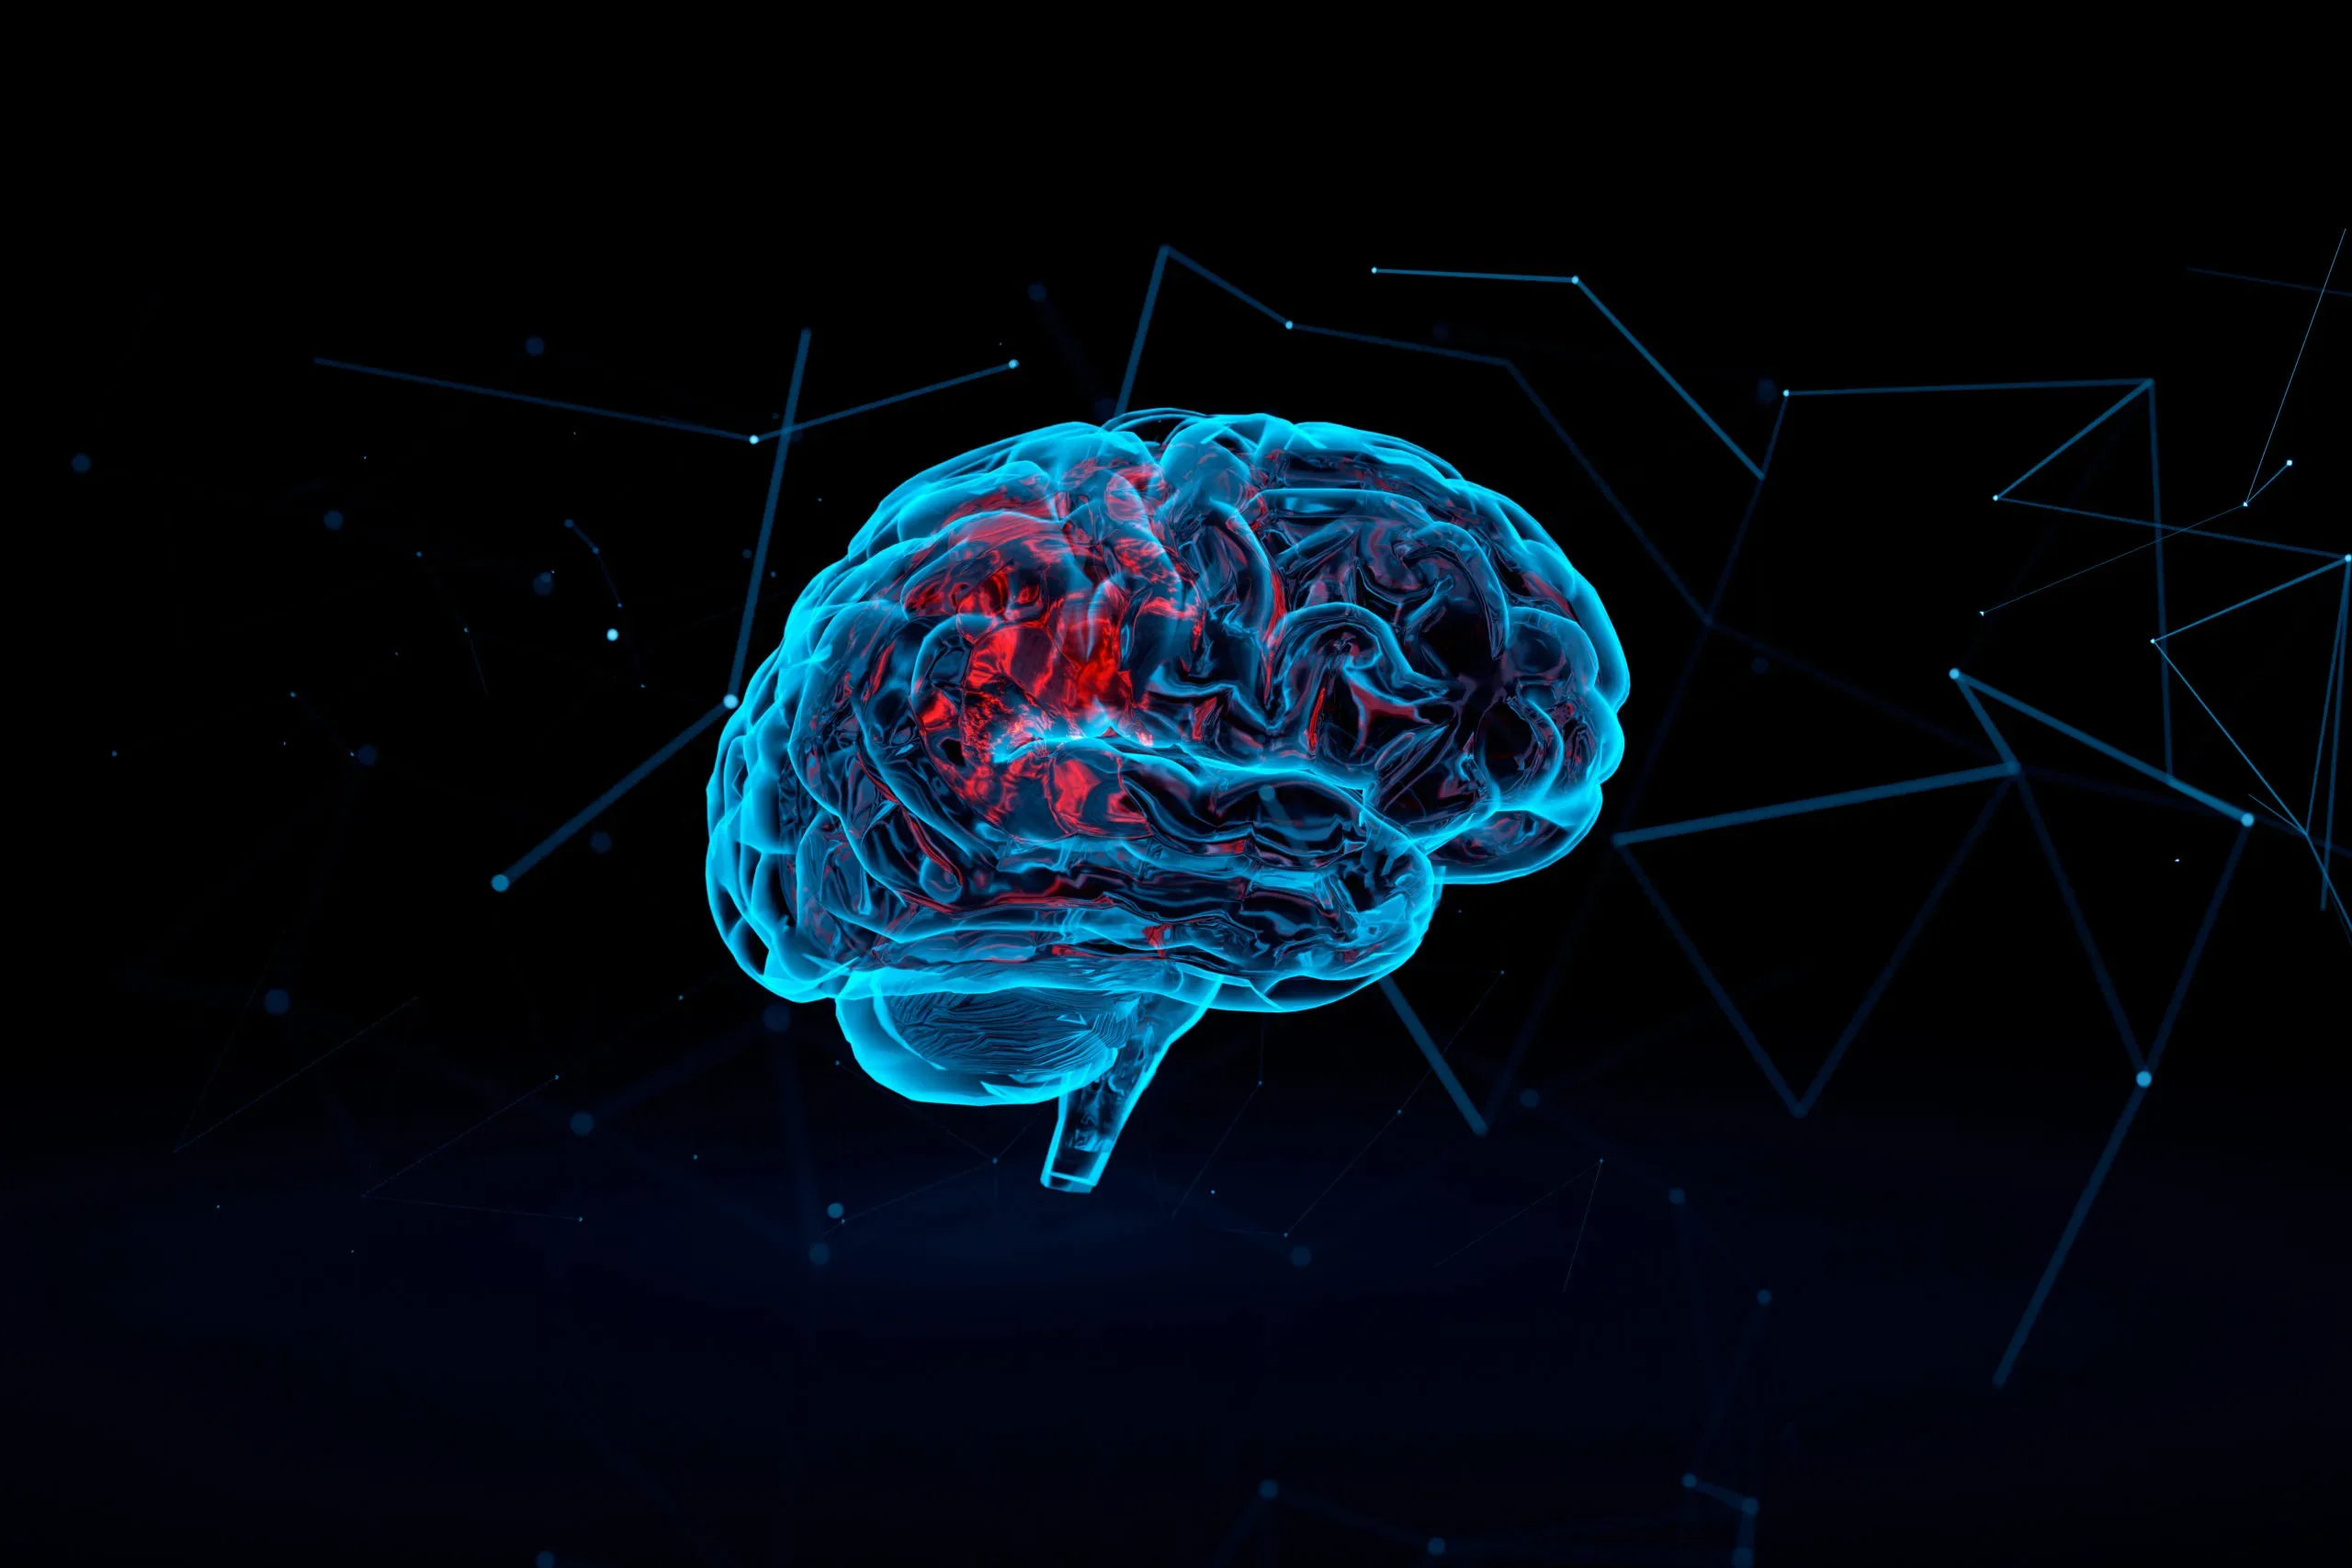 futuristic 3d image showing how brain could be scanned in future  in neon blue colors on black background